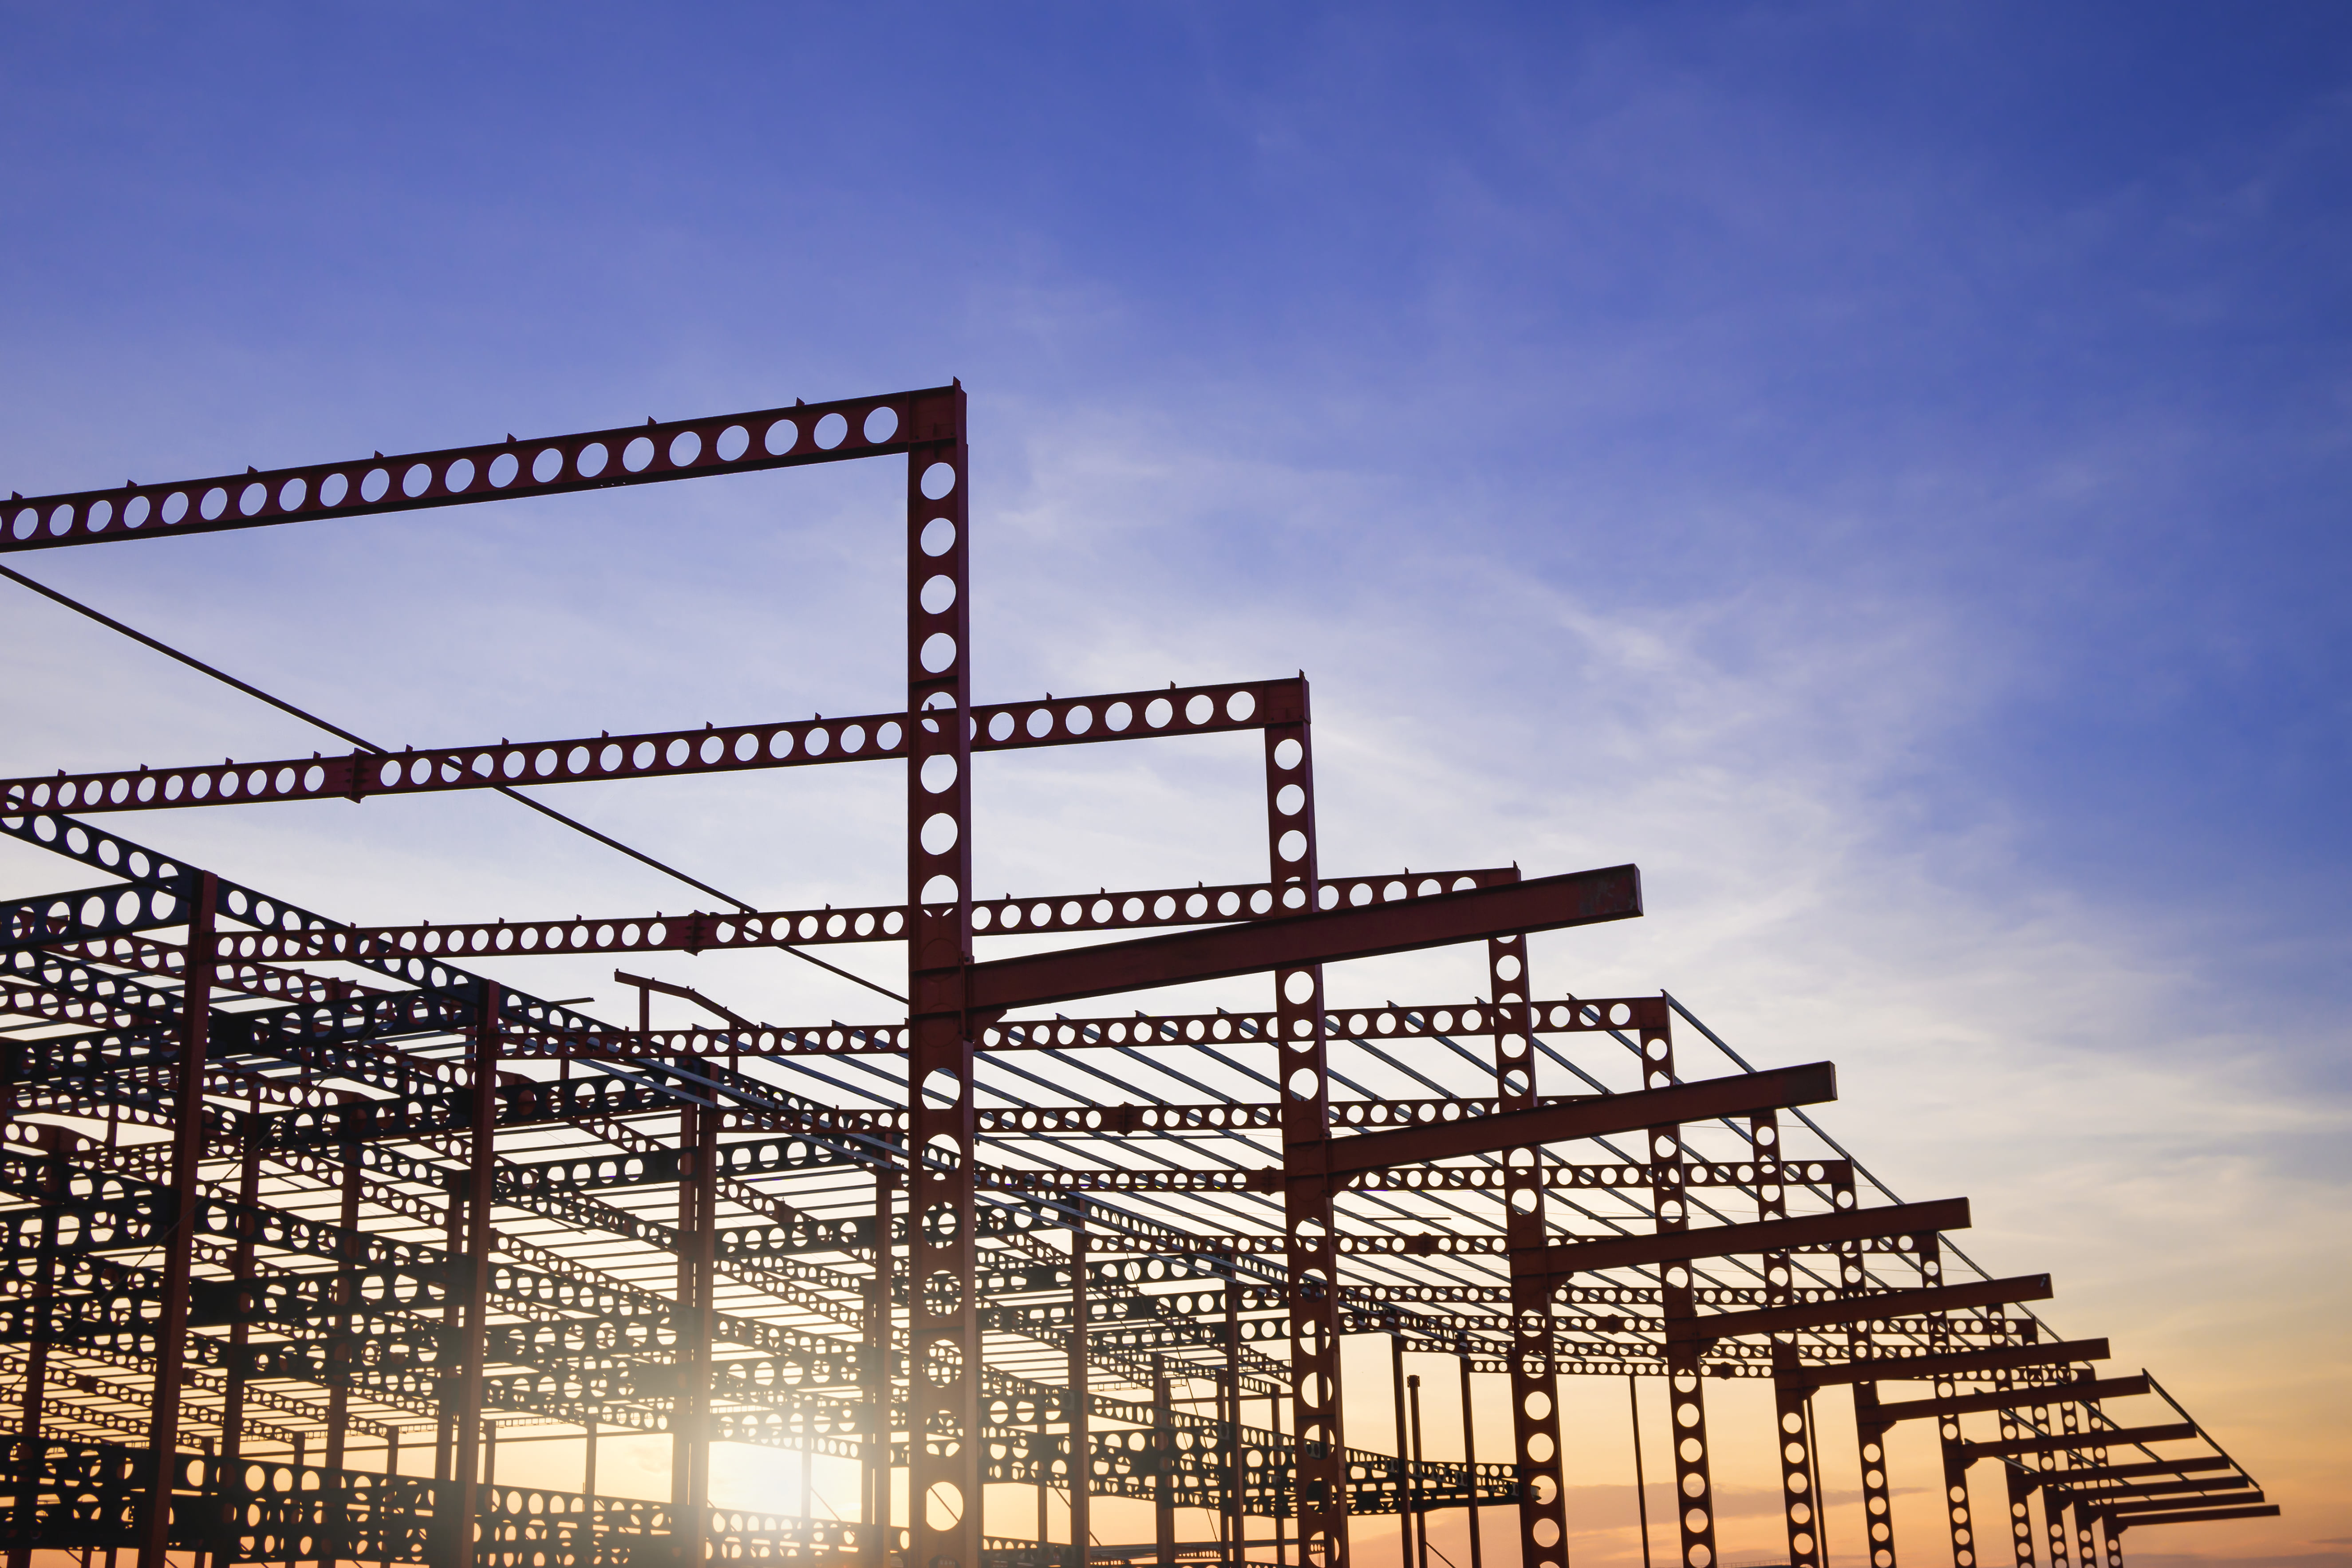 Silhouette of metal structure of large industrial building in construction site against sunset sky